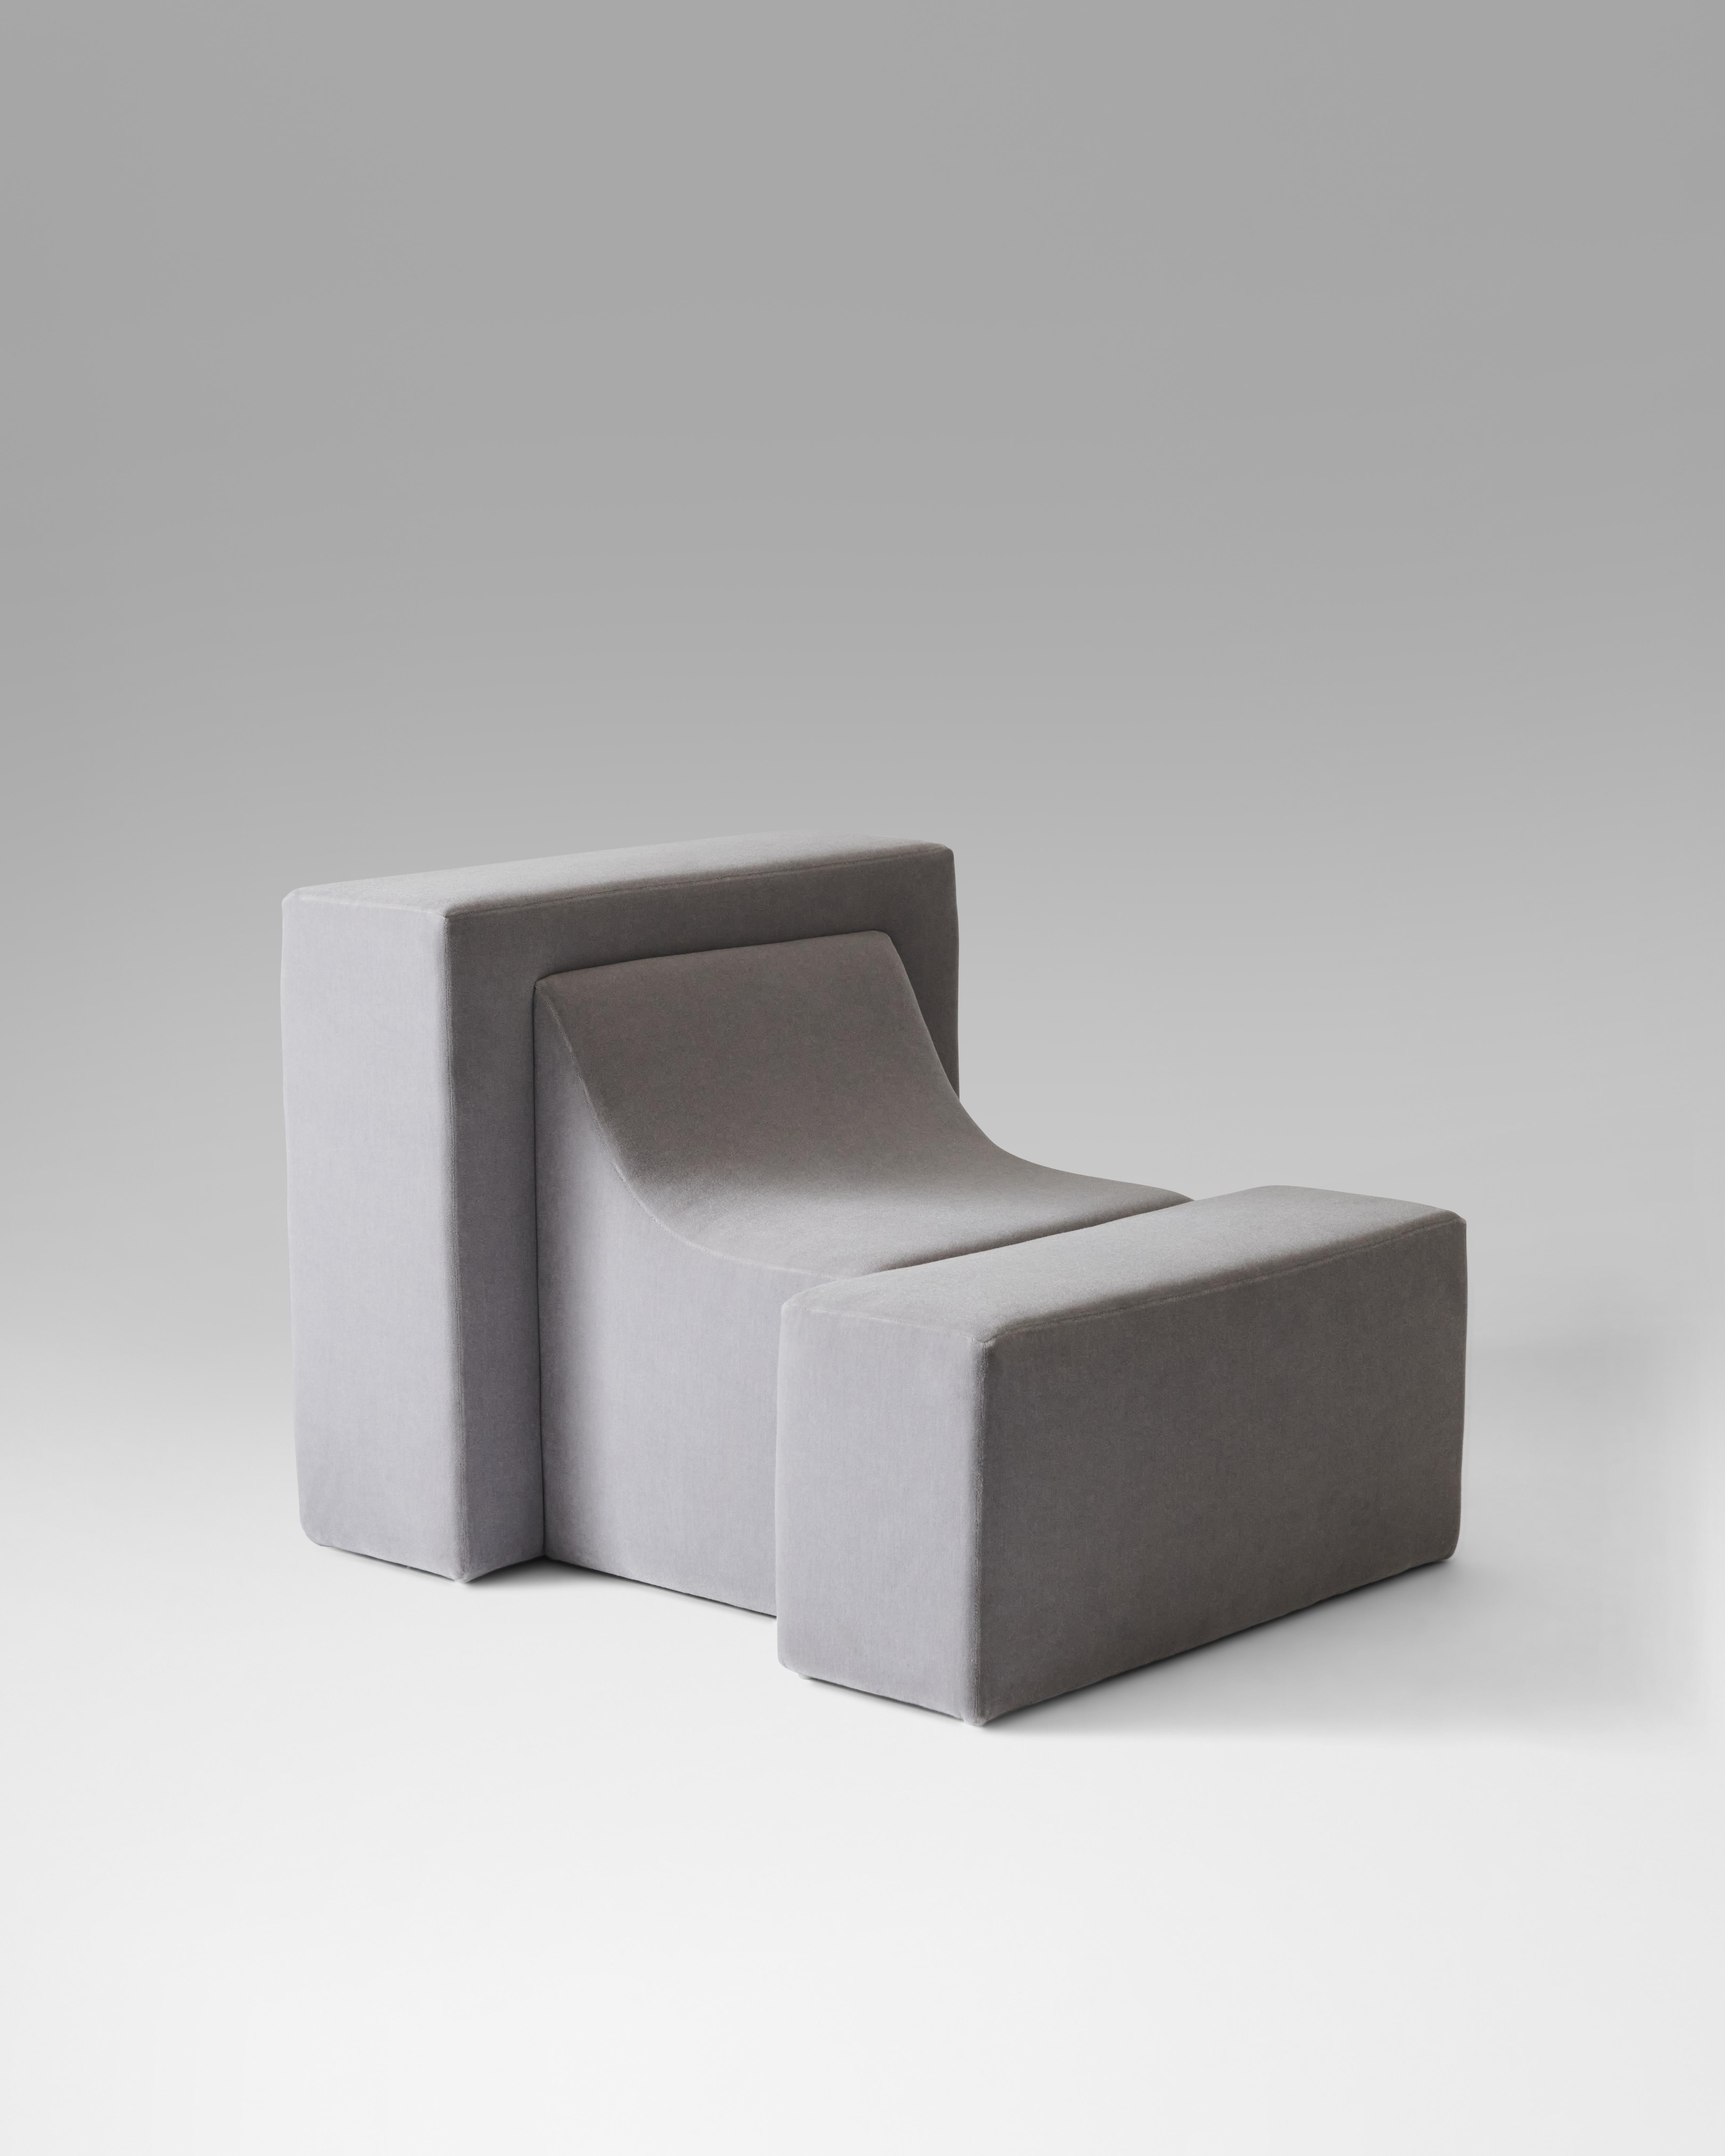 An assertive statement chair made from upholstered foam with a wooden core.

Upholstered in Maraham mohair. Can also be made in COM.



This piece is designed and handmade in Los Angeles, California.